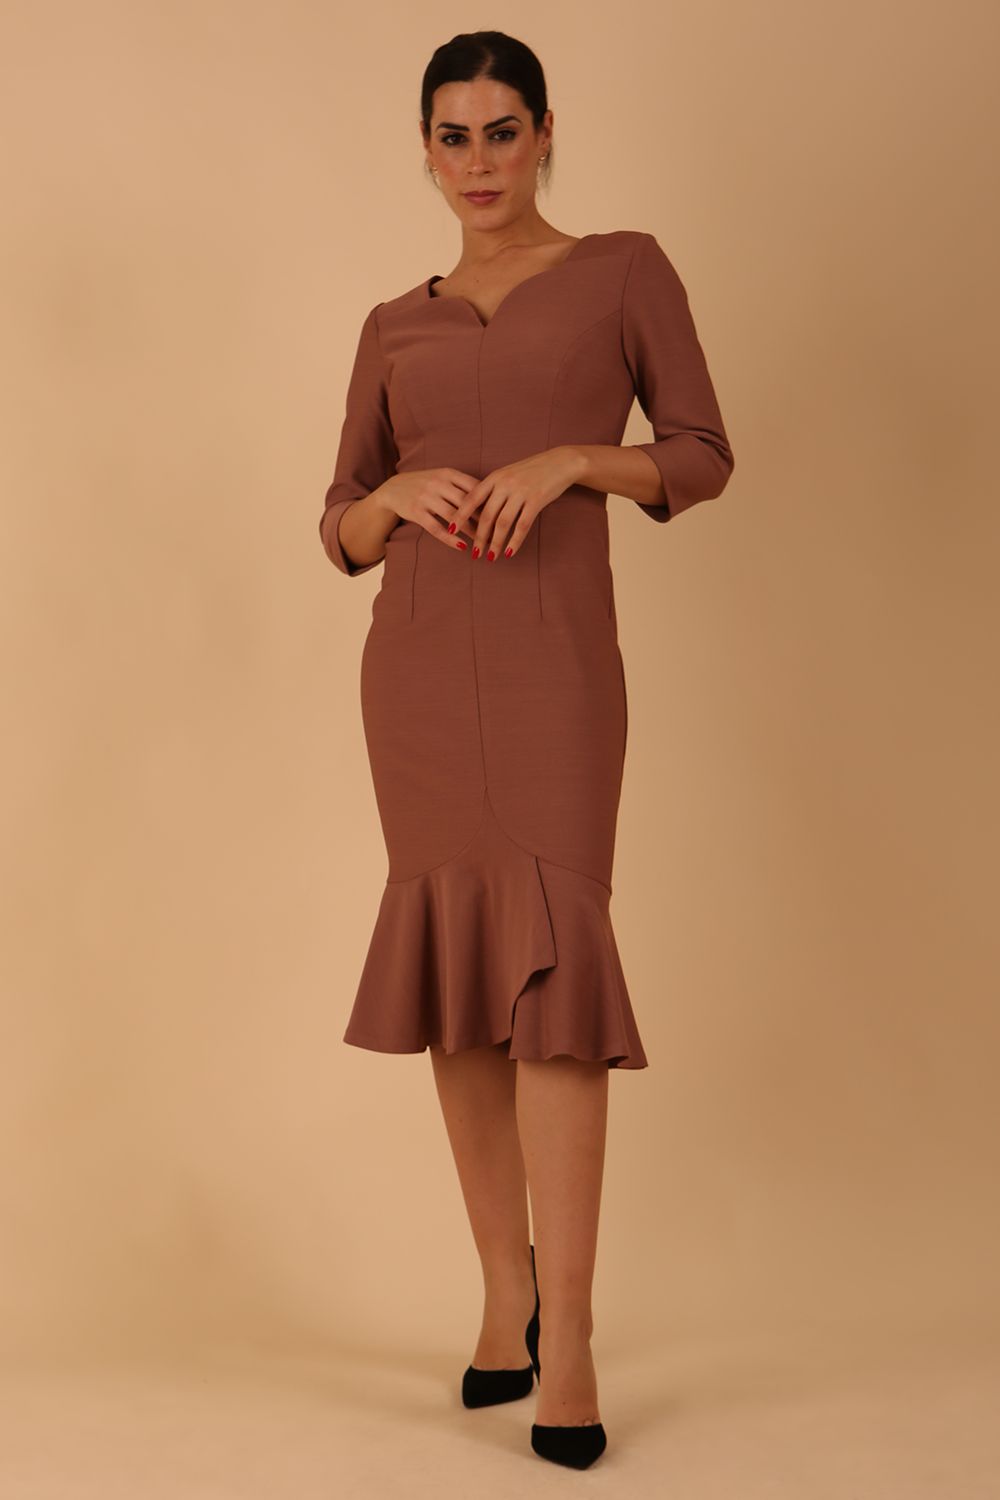 model wearing a diva catwalk Seed Brecon Fishtail Sleeved Dress in acorn brown colour